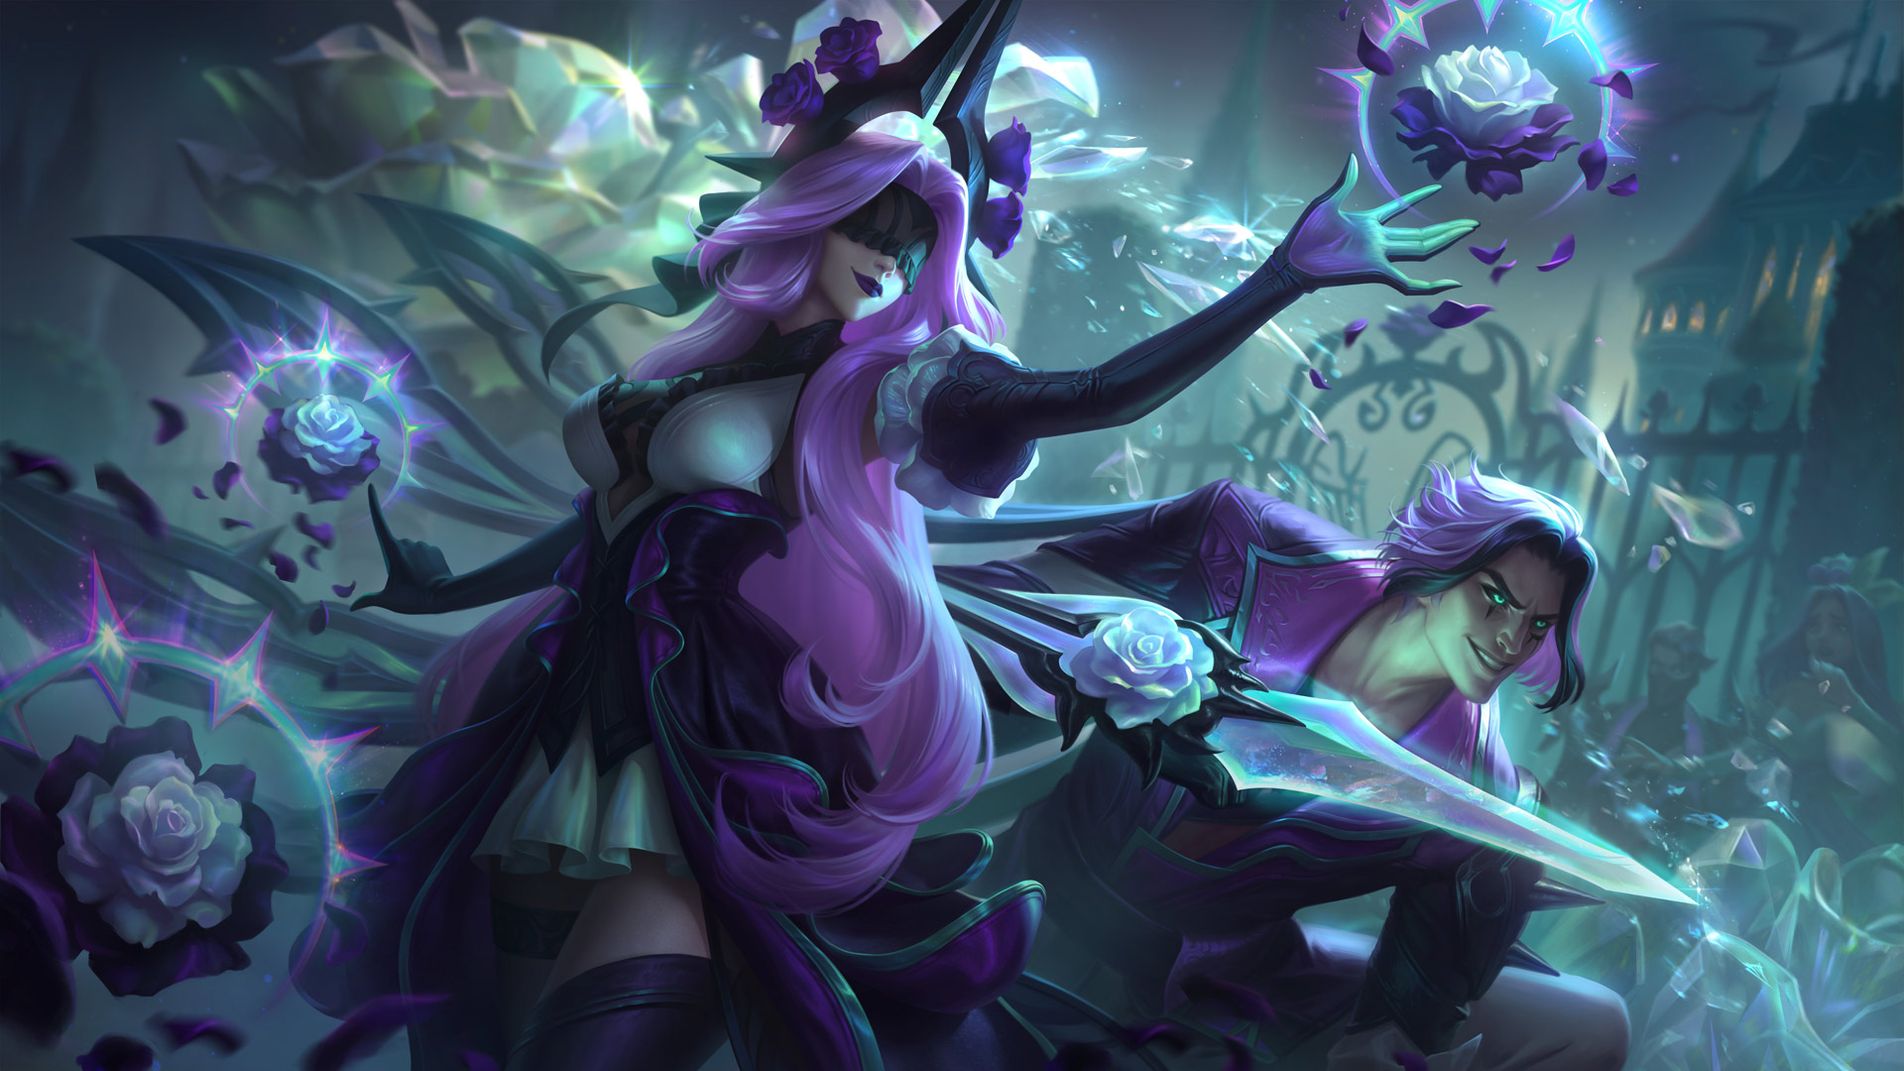 New LoL Players Need to Stick to One Champion like Syndra or Taric in Purple